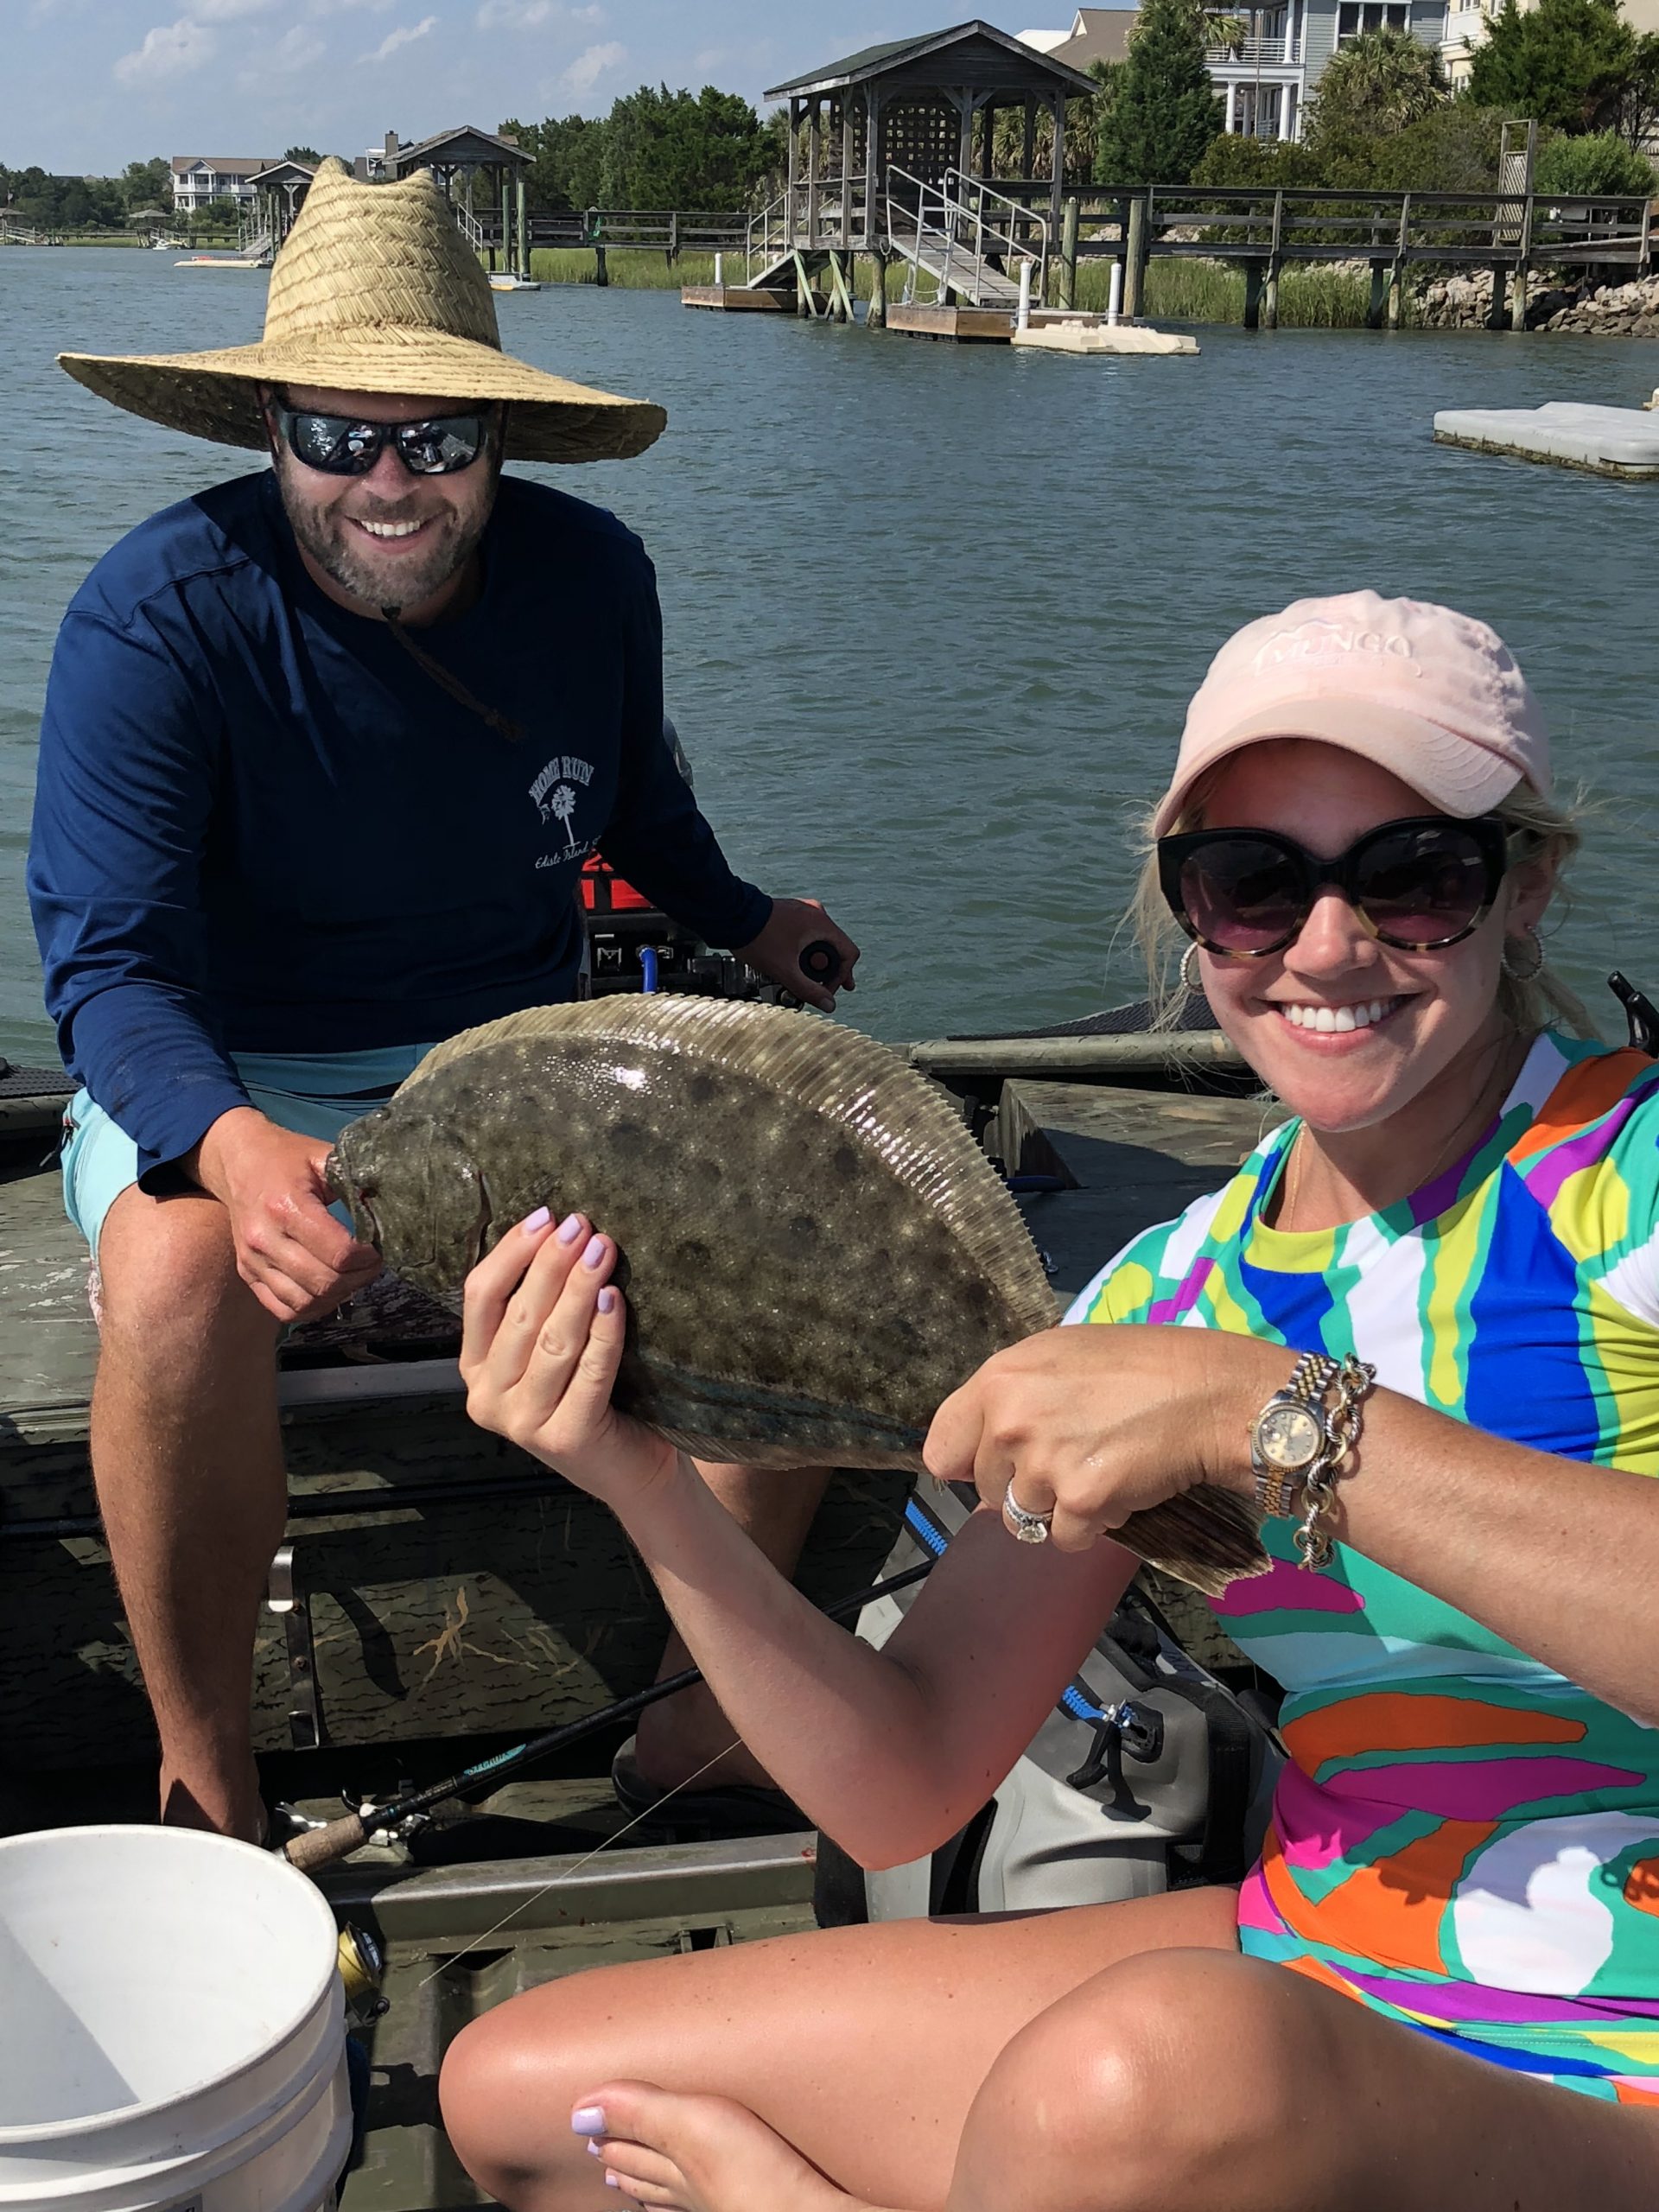 The best season for flounder fishing off the coast of South Carolina is from April to November. Matt Mungo says fishing for flounder takes a skilled hand, one that can recognize the subtle bite and the slight pull of the fish. Matt’s wife, Mary Grace, must have the knack to have pulled in this nice flounder! 